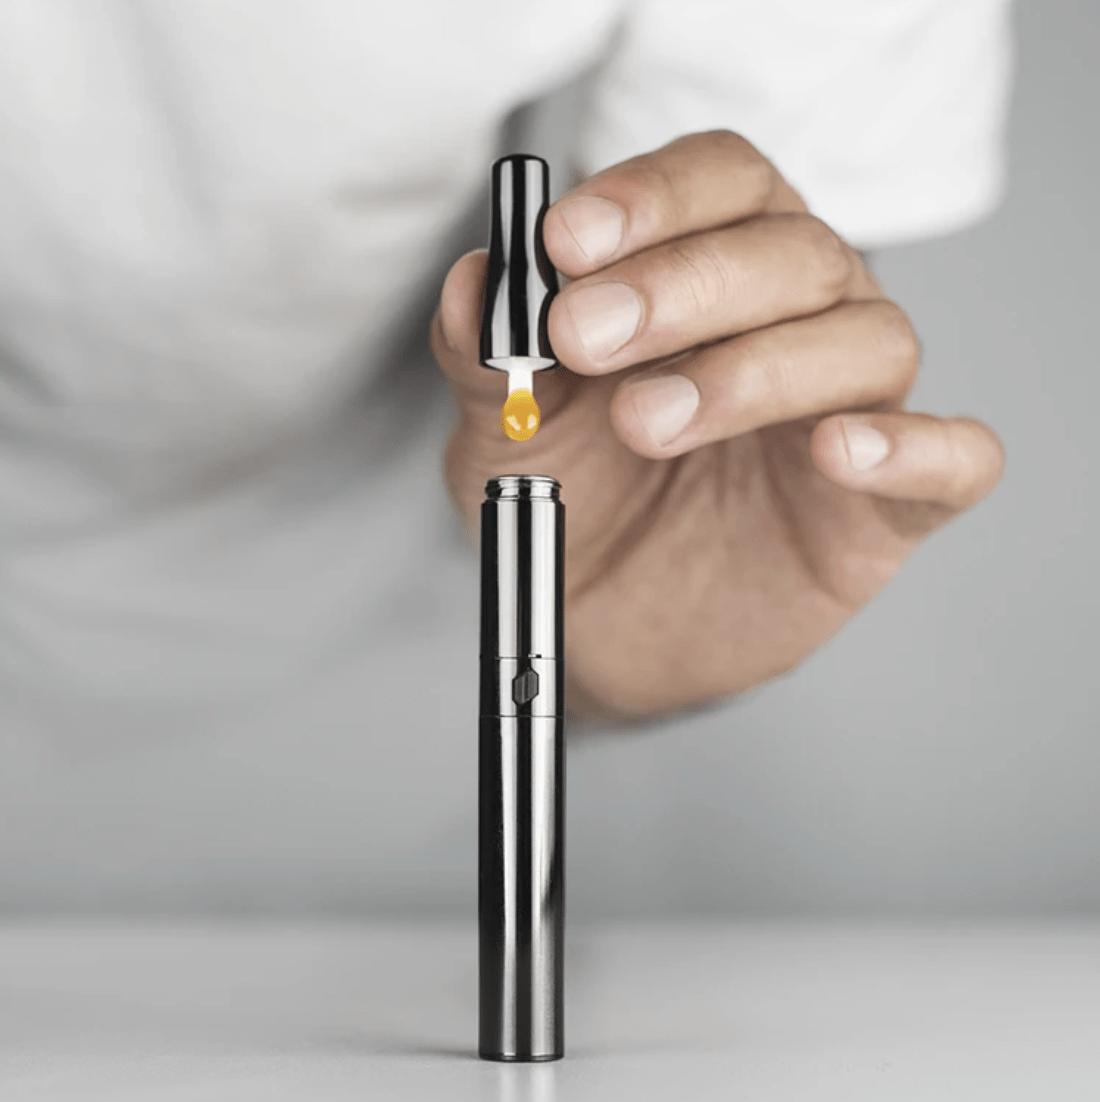 PuffCo Plus Portable Oil Vaporizer - Canvast Supply Co. 